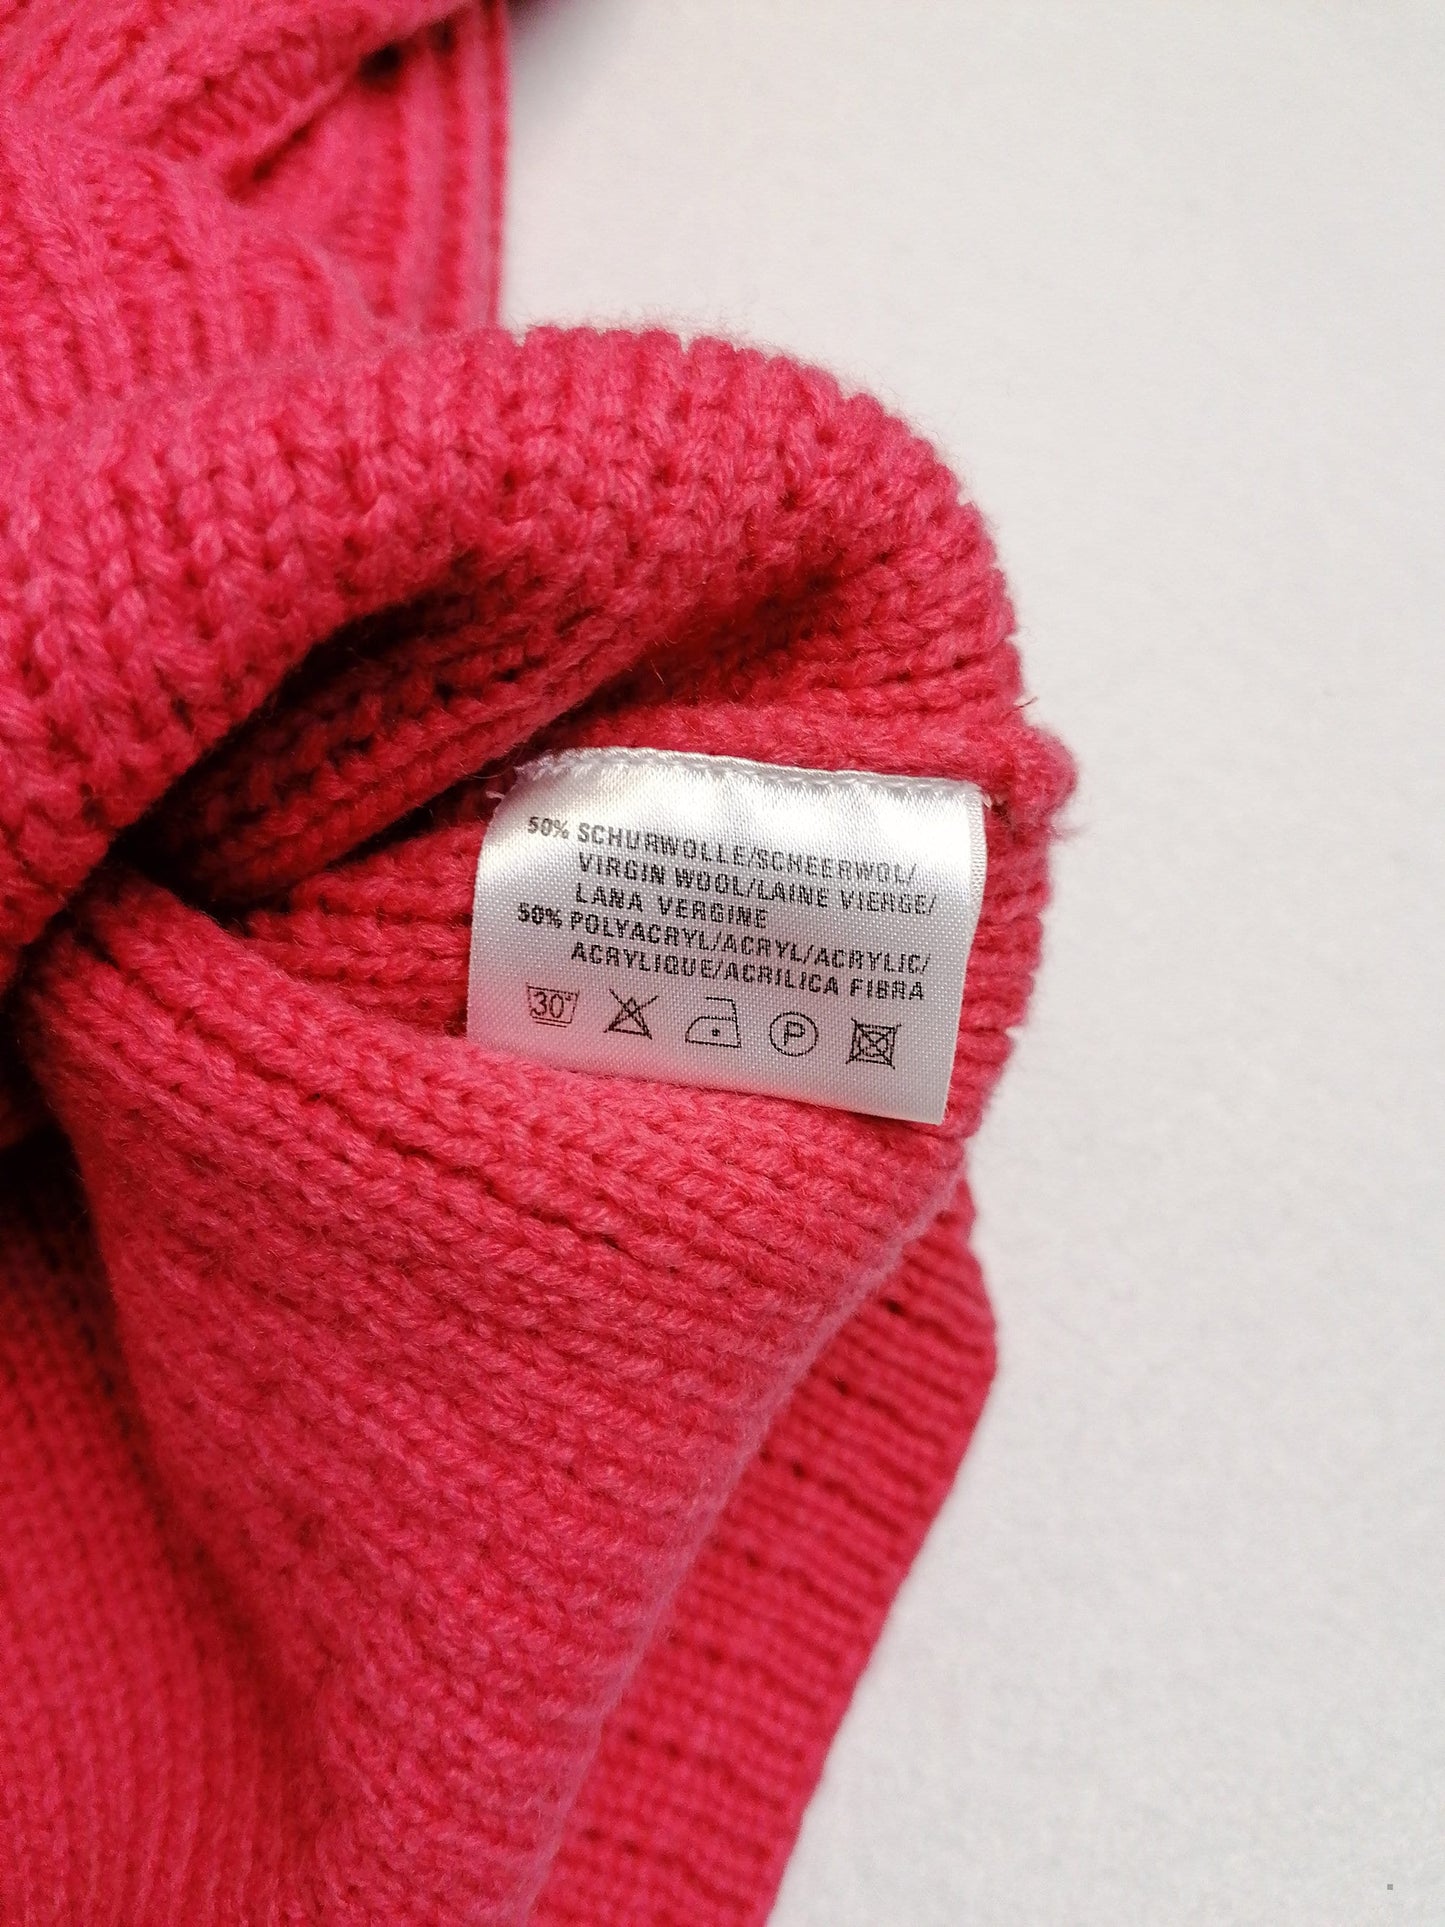 90's Virgin Wool Cable Knit Pink Sweater - size S-M